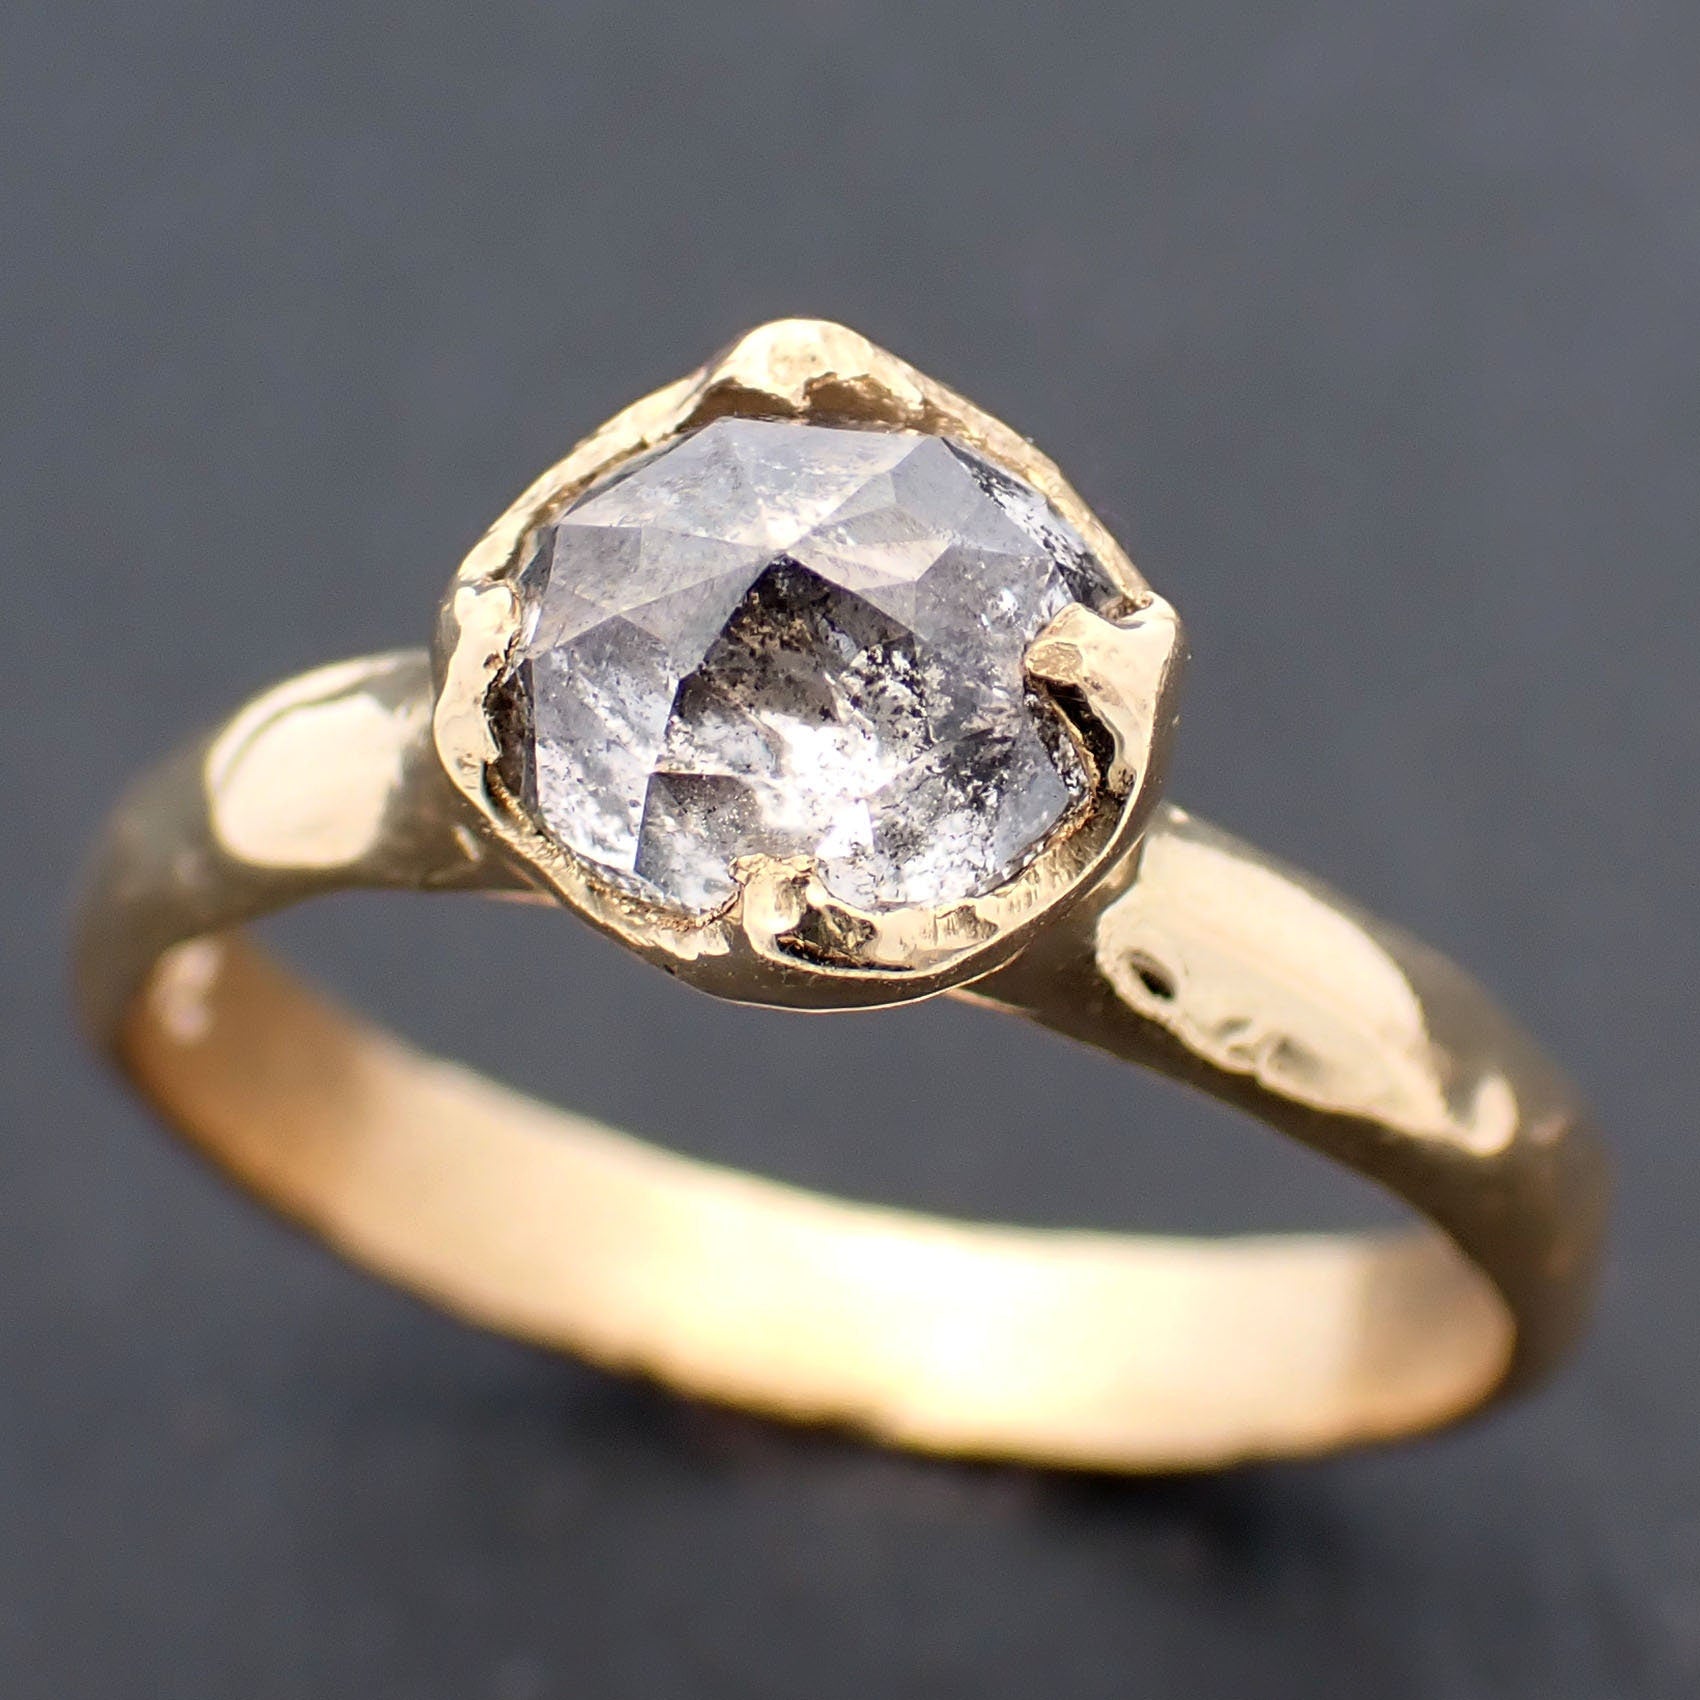 Faceted Fancy cut Salt and Pepper Diamond Solitaire Engagement 18k Yellow Gold Wedding Ring byAngeline 3448